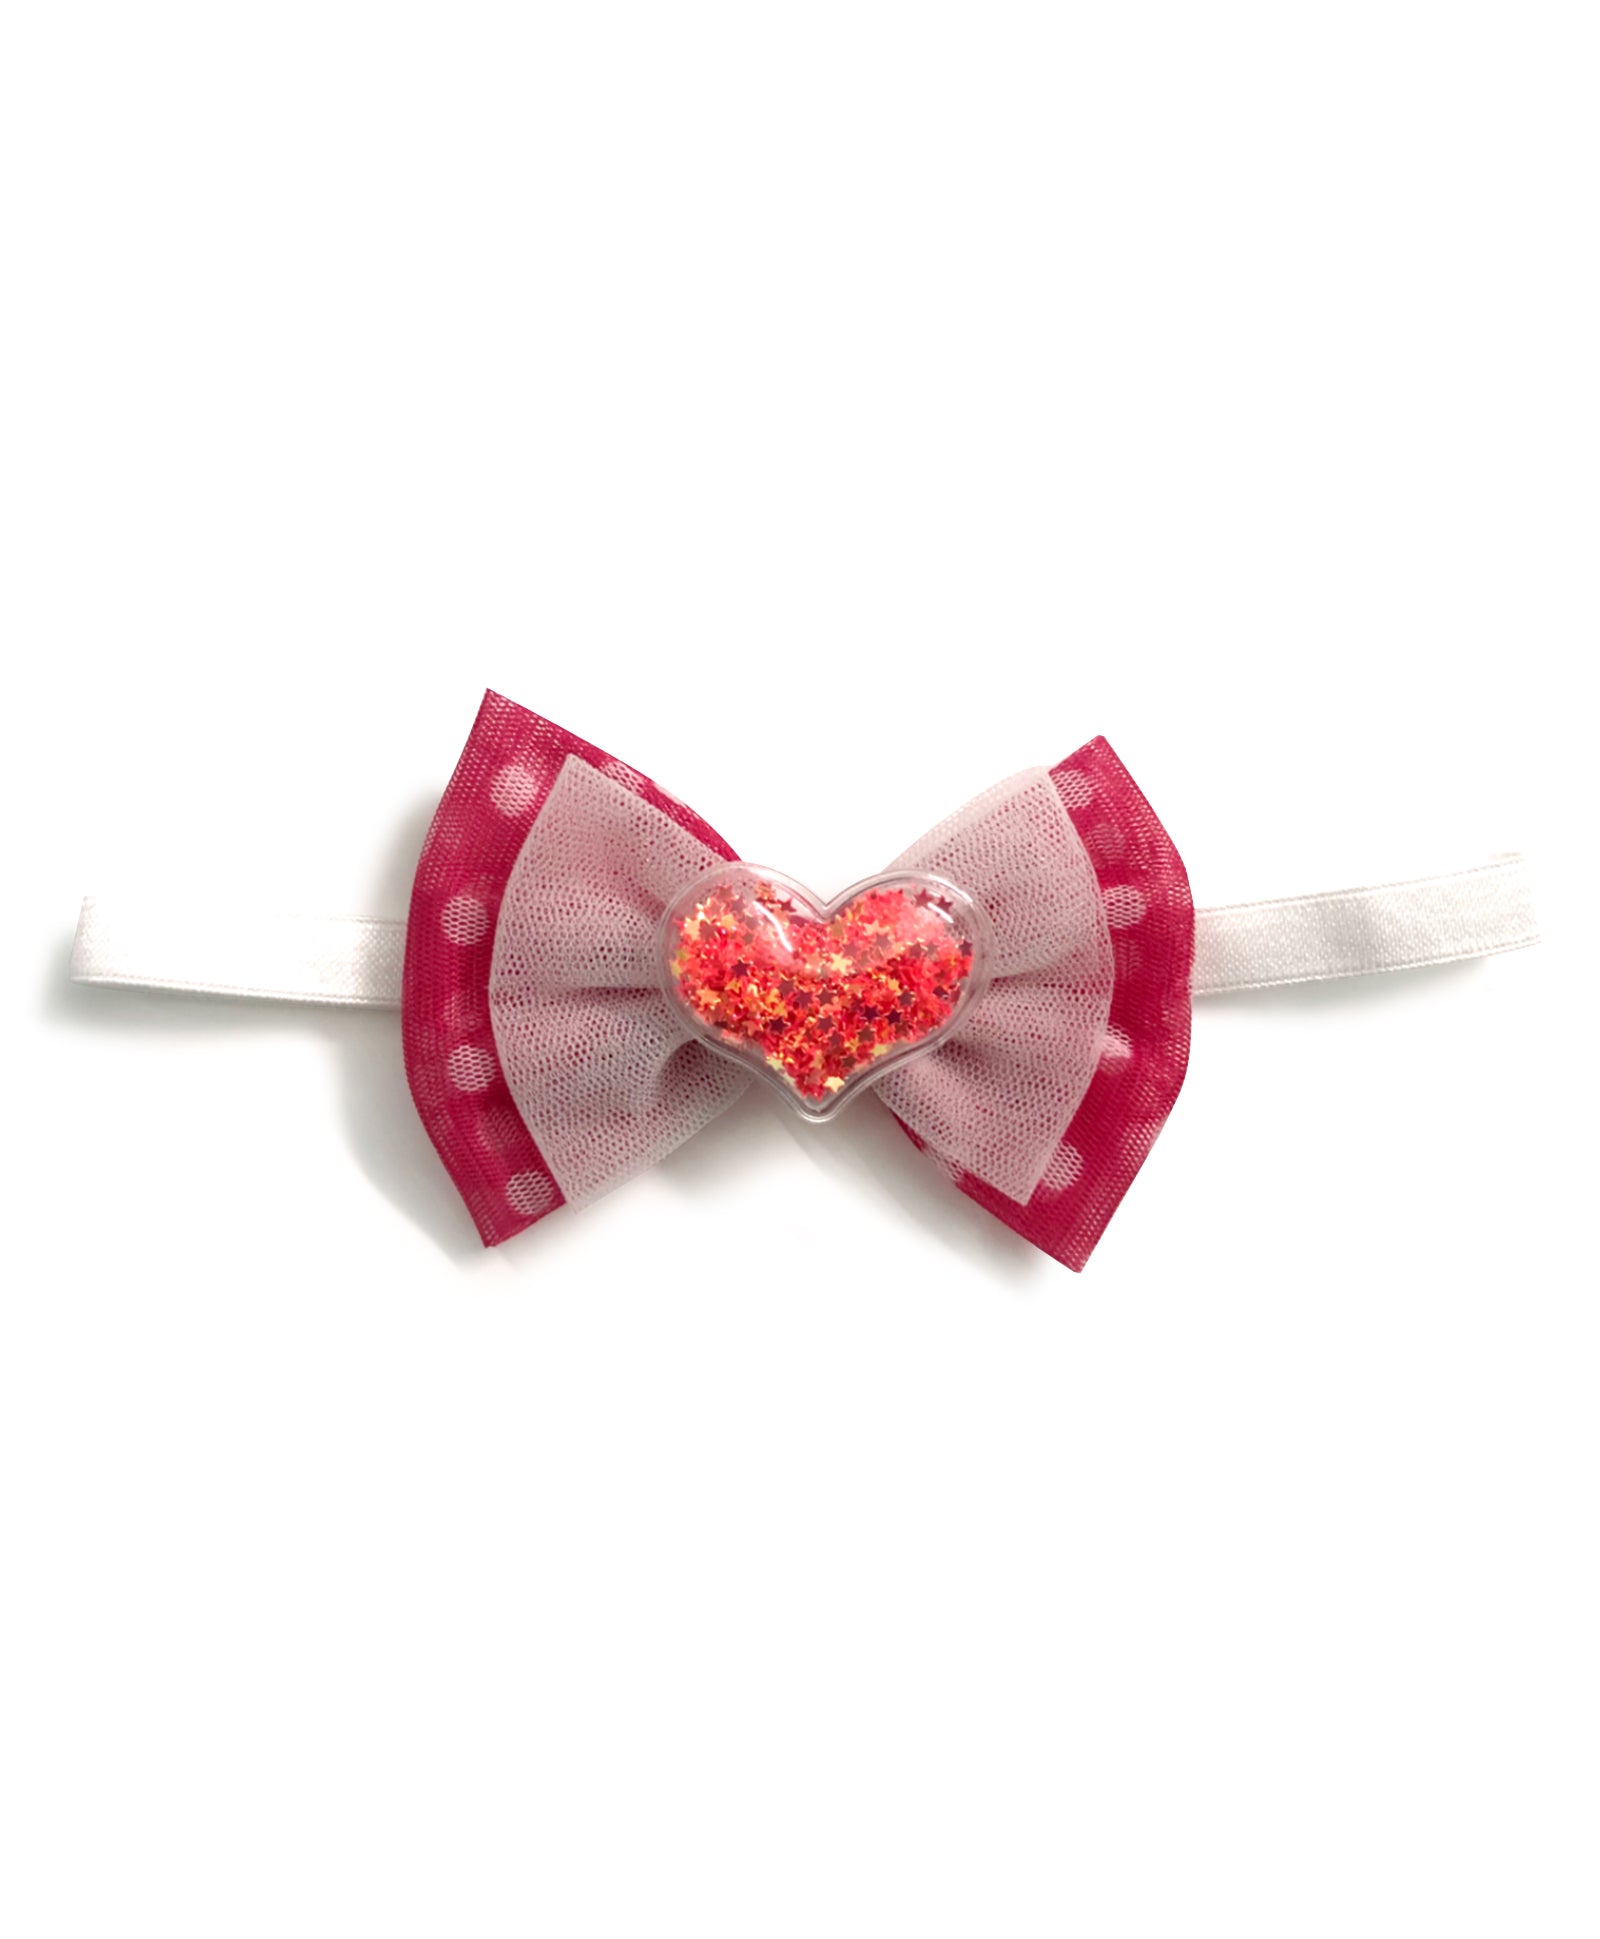 Net Bow with Sequined Heart Headband - Dark Pink